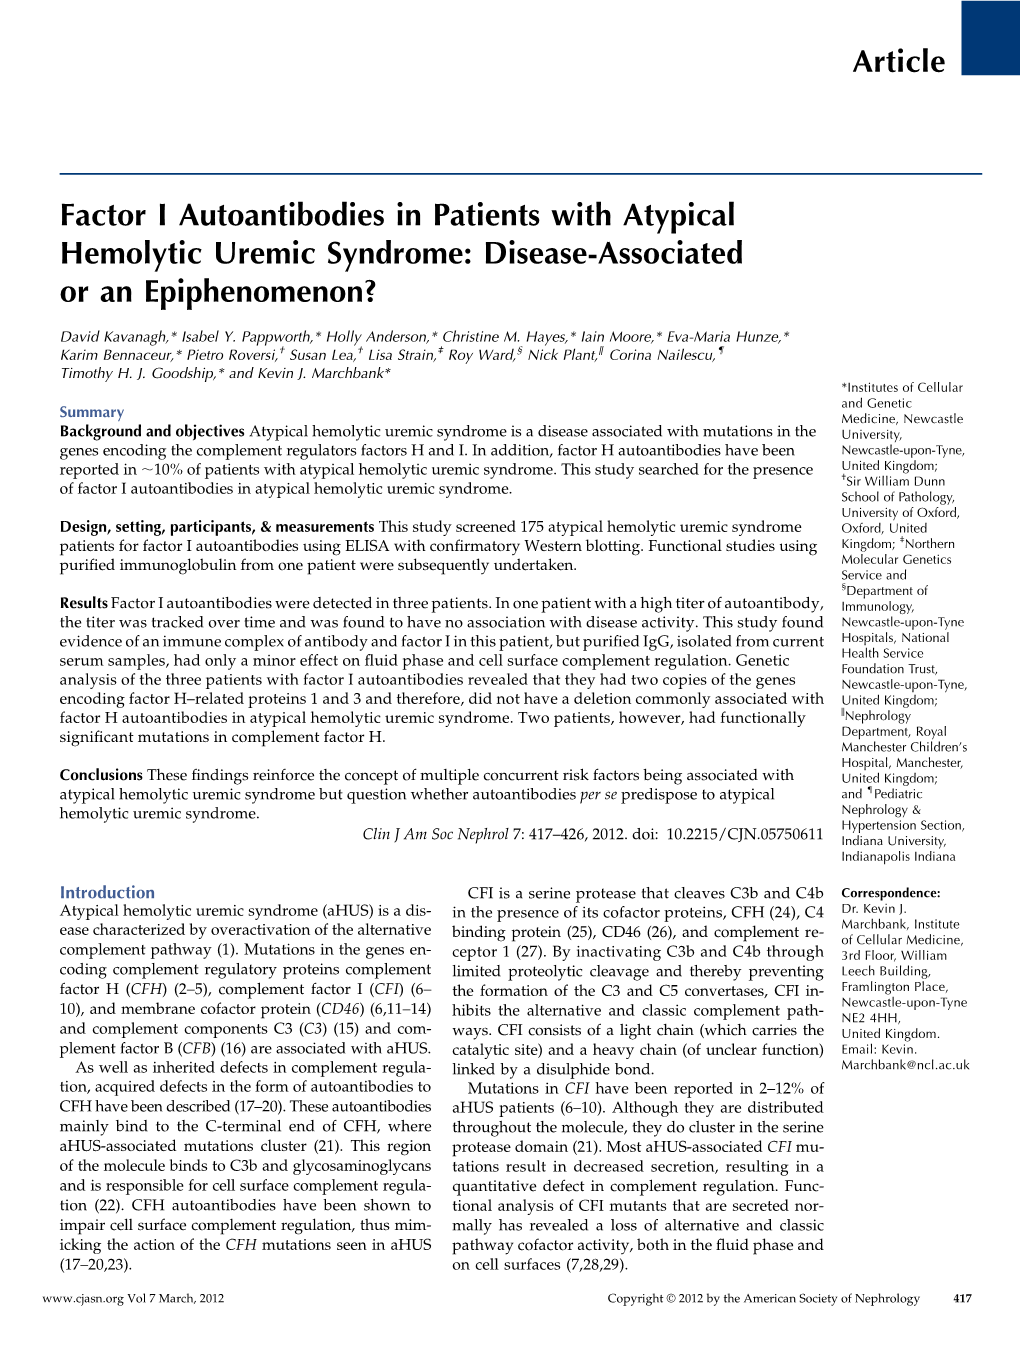 Article Factor I Autoantibodies in Patients with Atypical